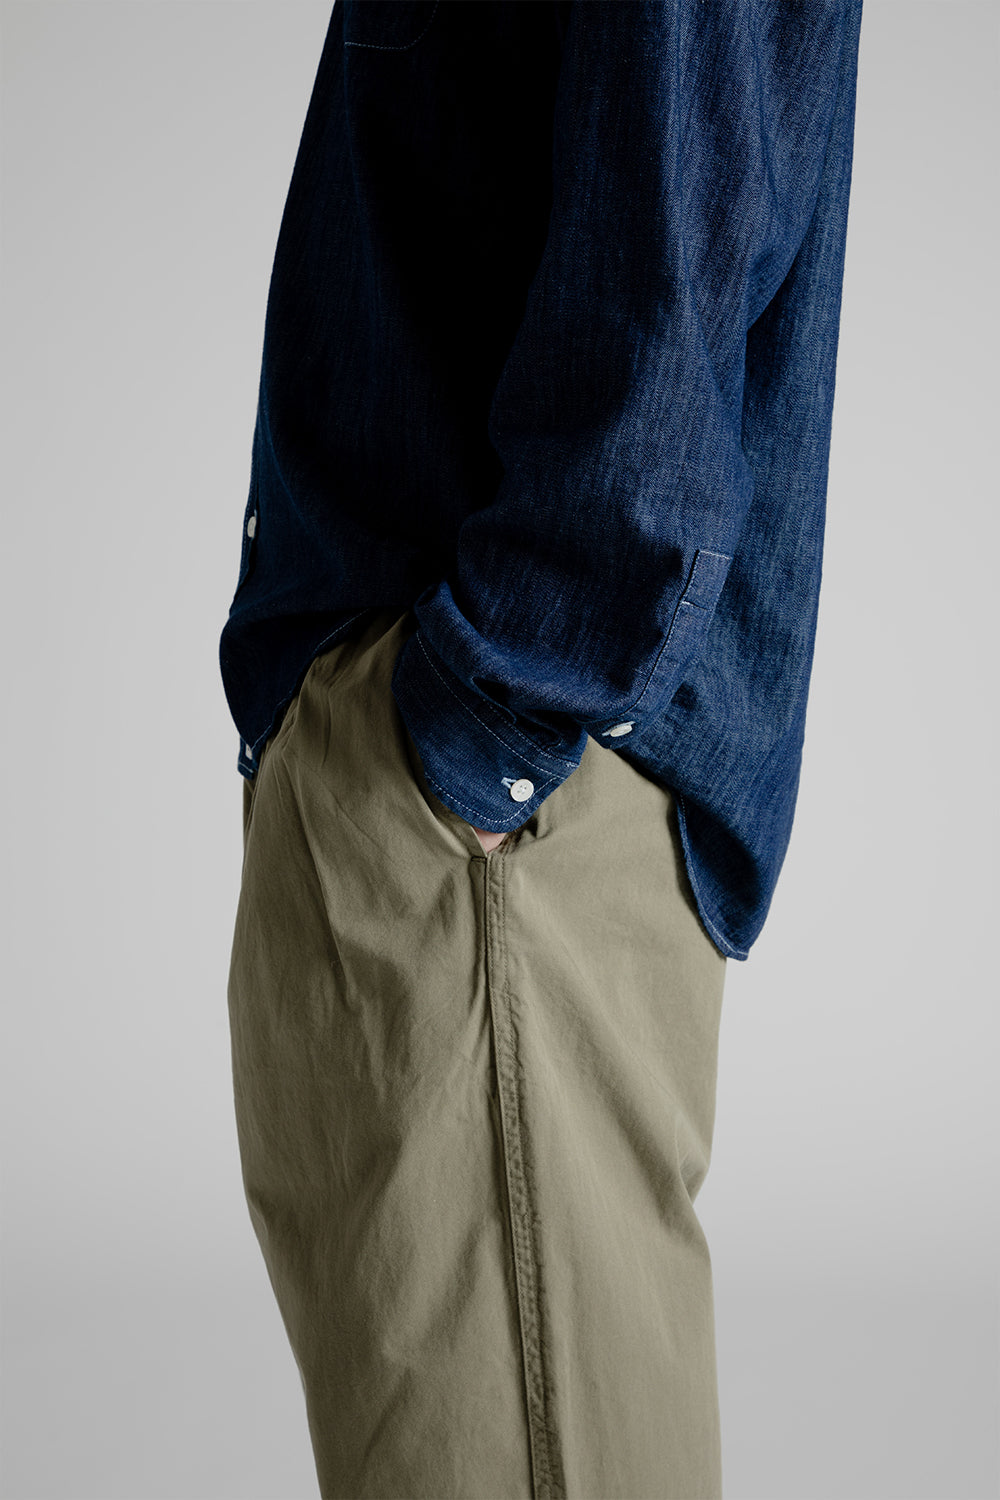 Kestin Clyde Pant in Sage.